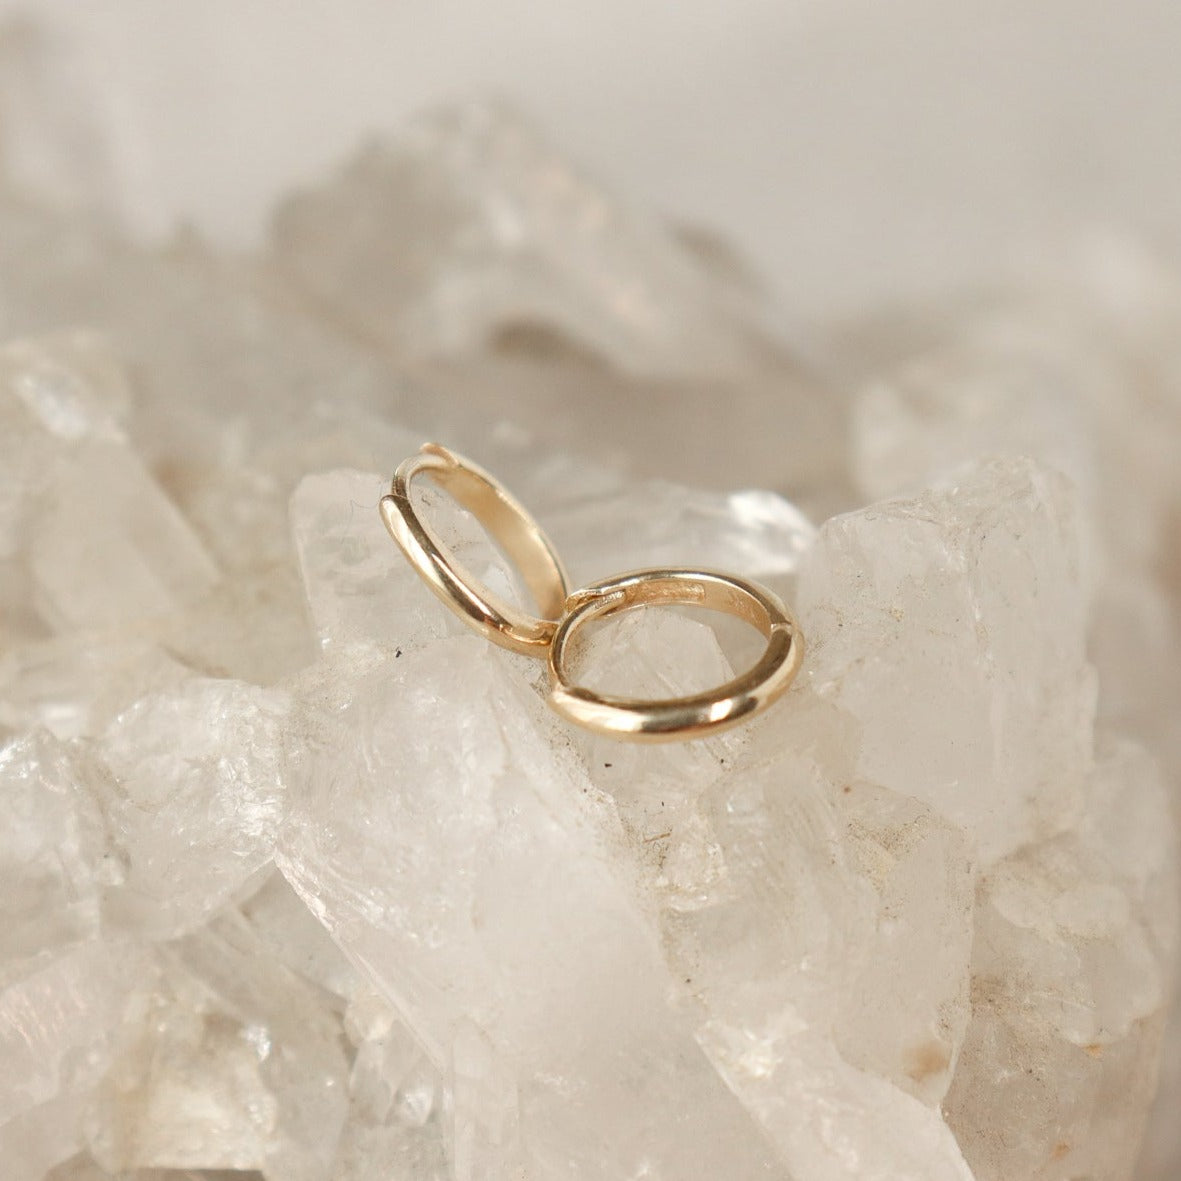 A pair of plain 14k gold huggie hoops are laid out on a crystal background.